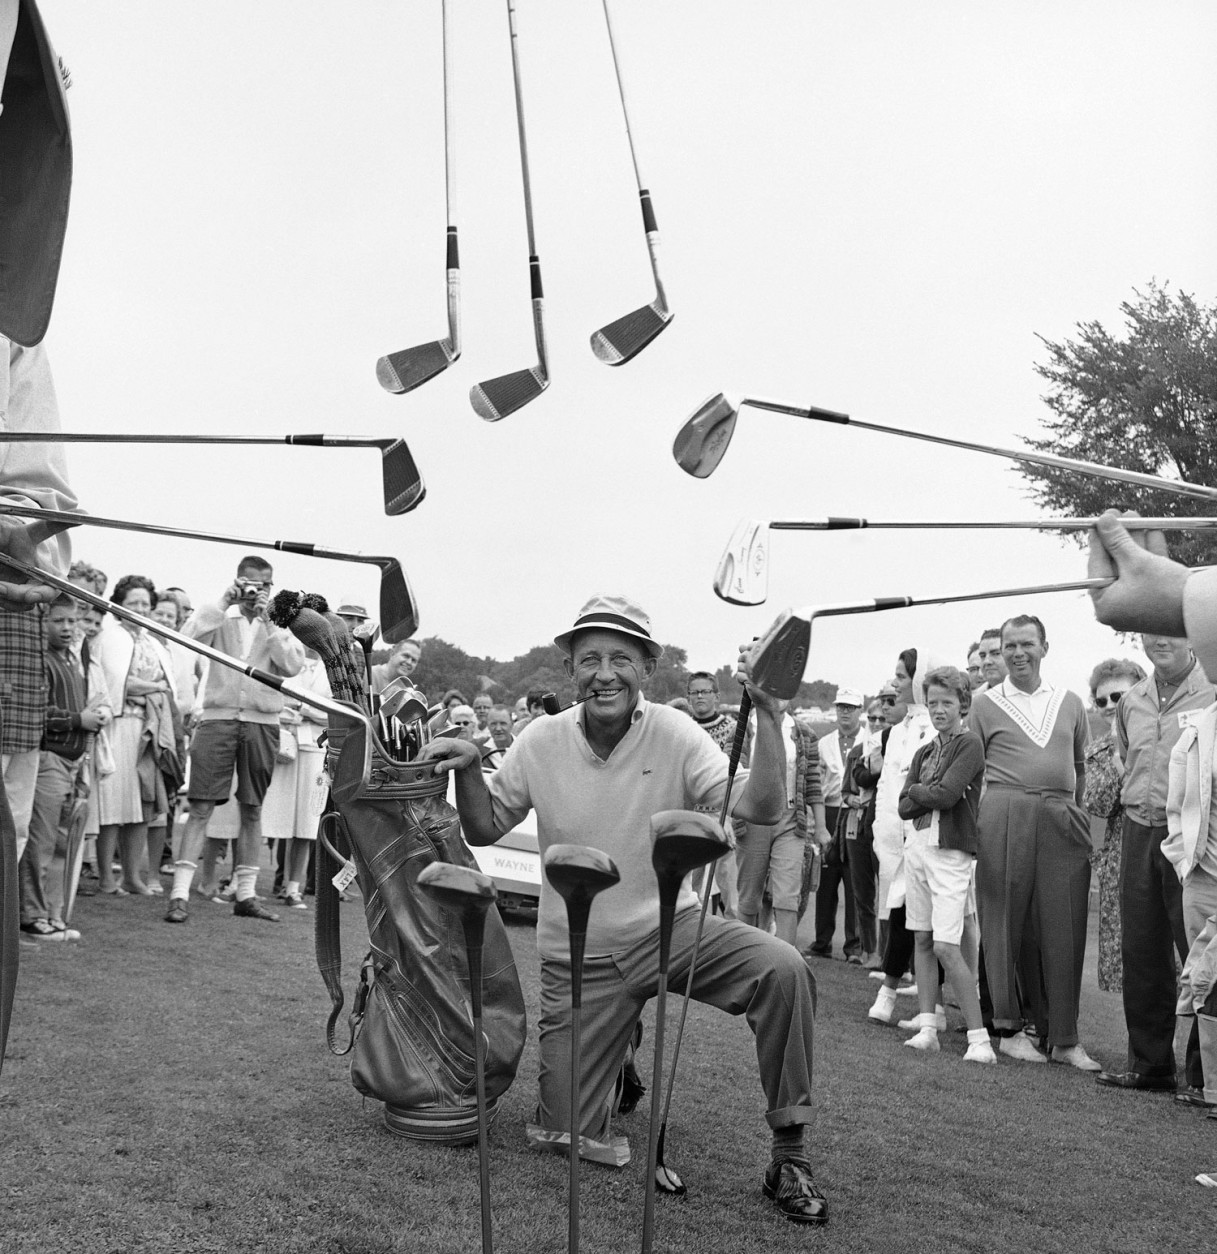 The Pebble Beach Pro-Am has a long history of bringing celebrities to the links, including Bing Crosby more than 50 years ago. (AP Photo/Gene Herrick)